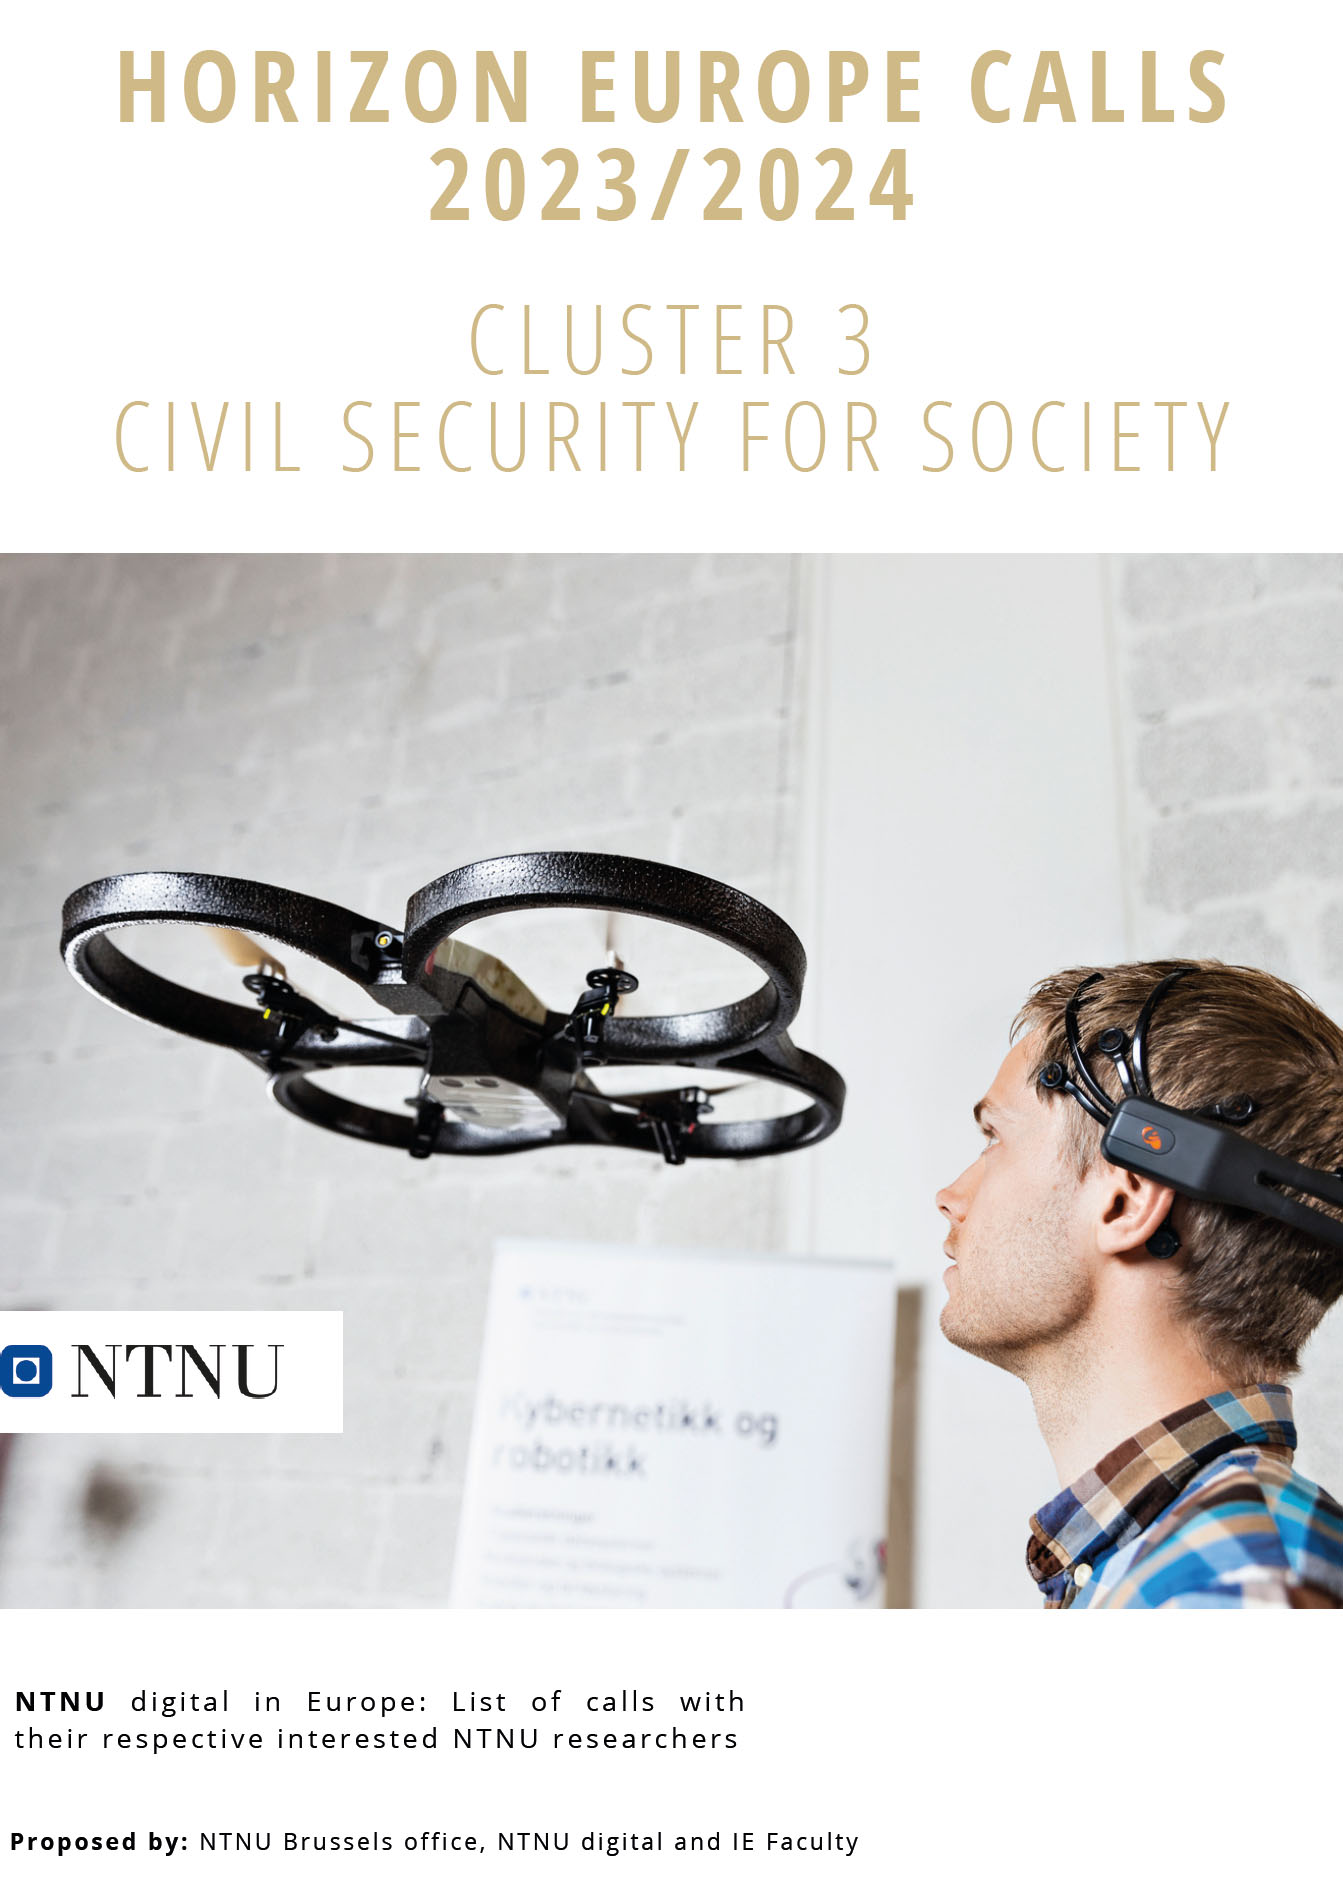 Cover - Cluster 3 Civil Security Society – Horizon Europe brochure, October 2023